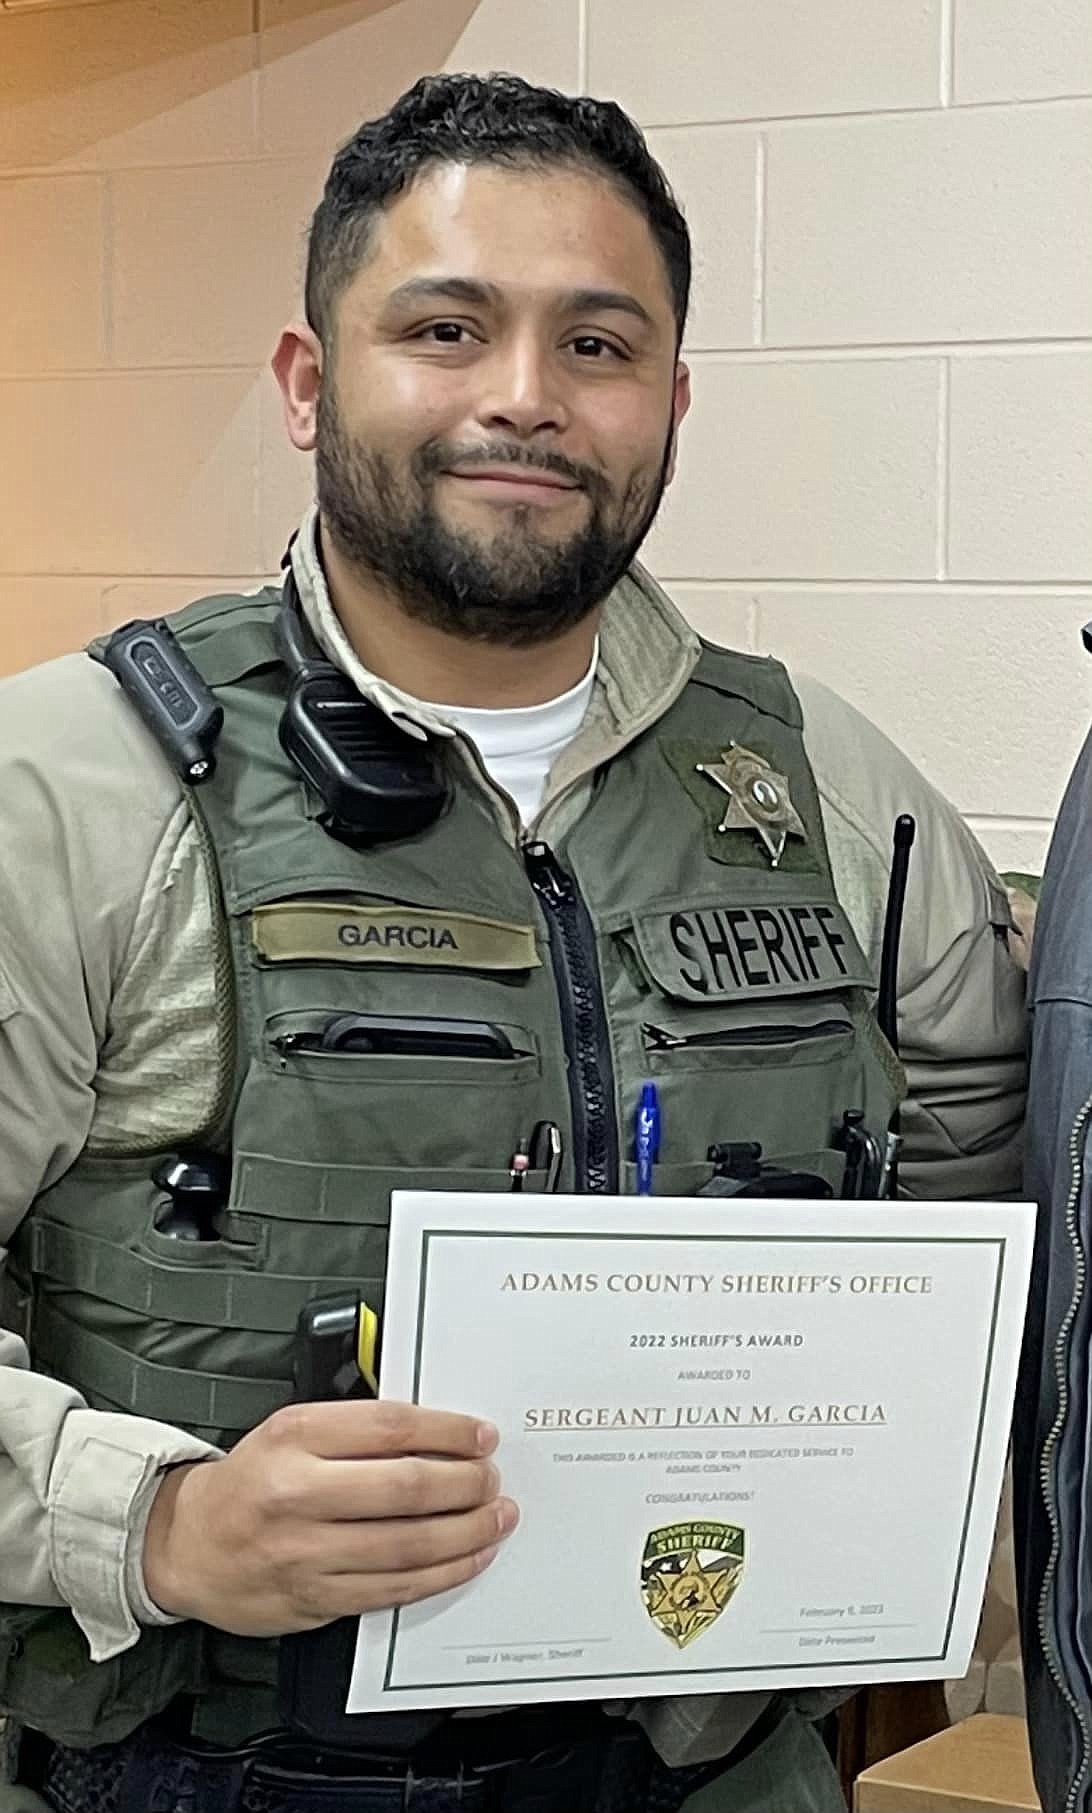 Sergeant Juan Garcia received supervisor of the year honorable mention at the annual Adams County Sheriff’s Office awards dinner.